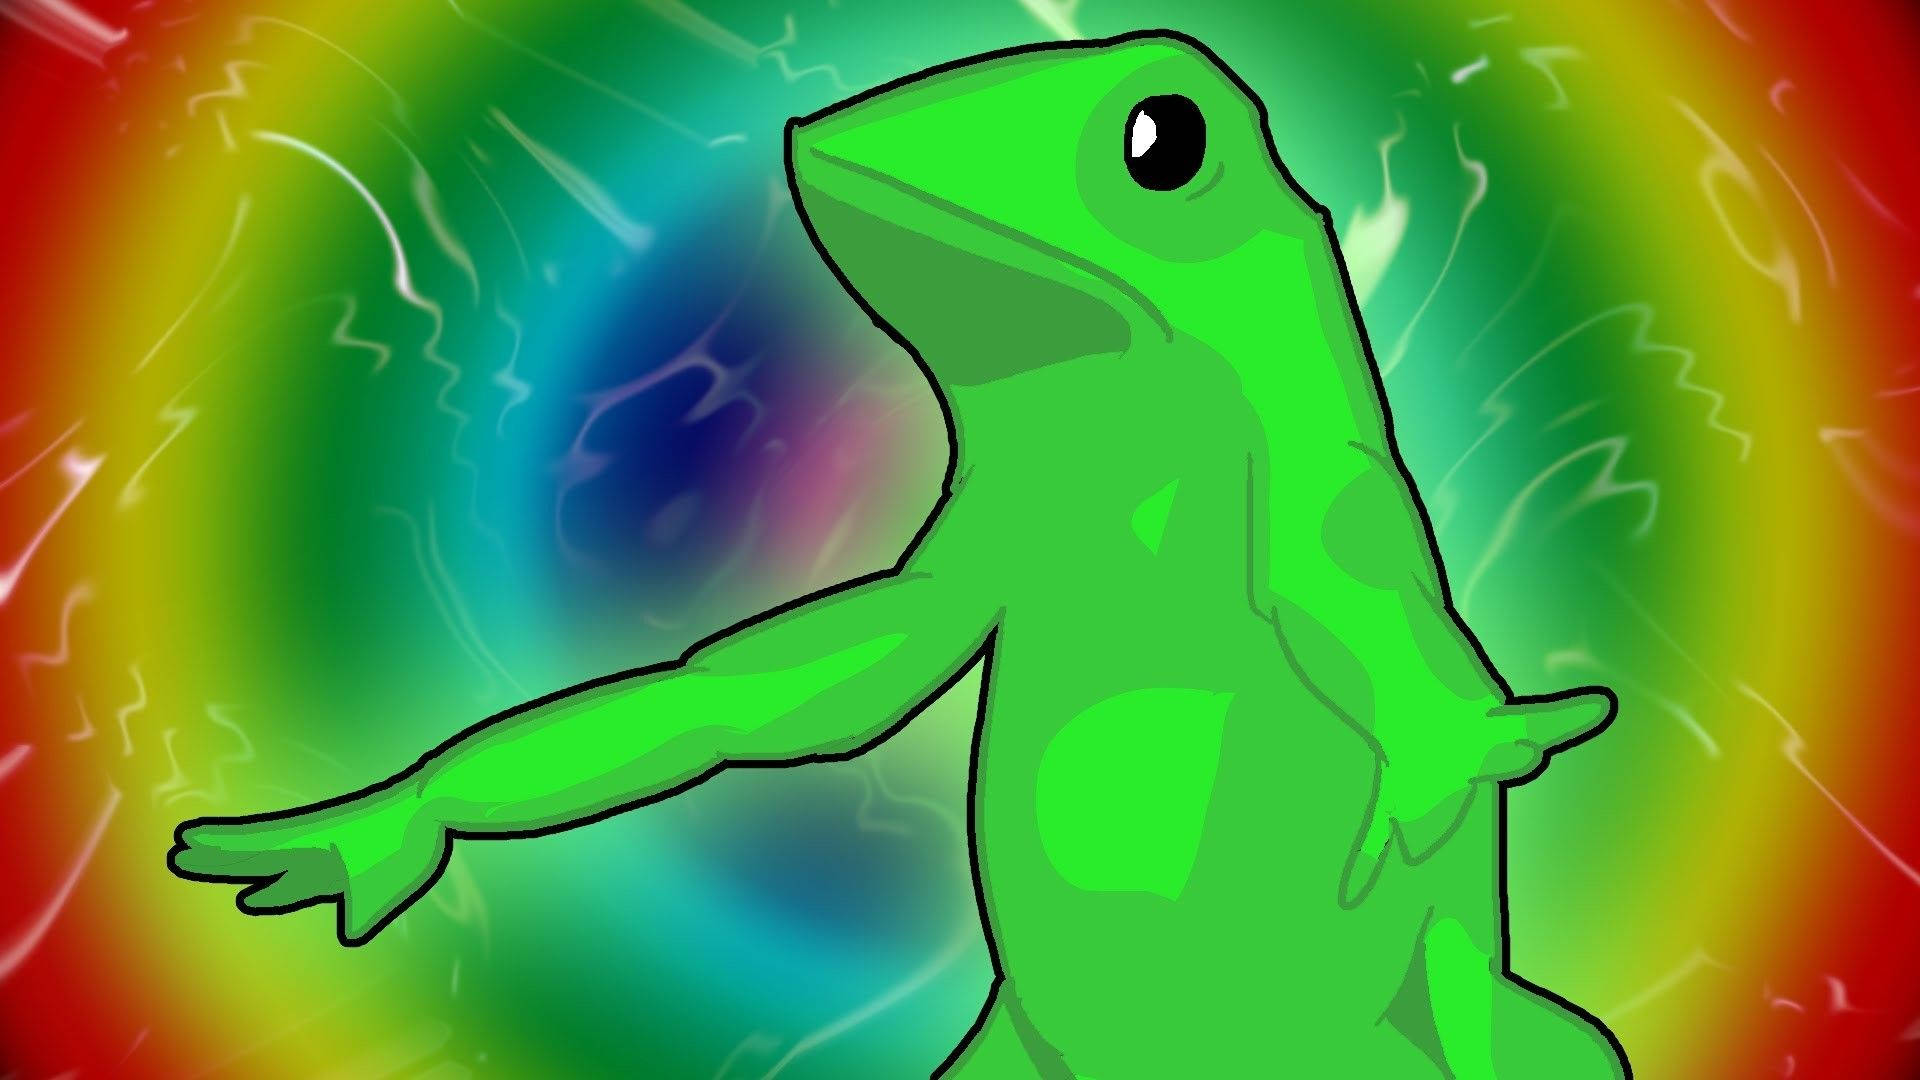 Frog meme with open arms and feet in a rainbow background.